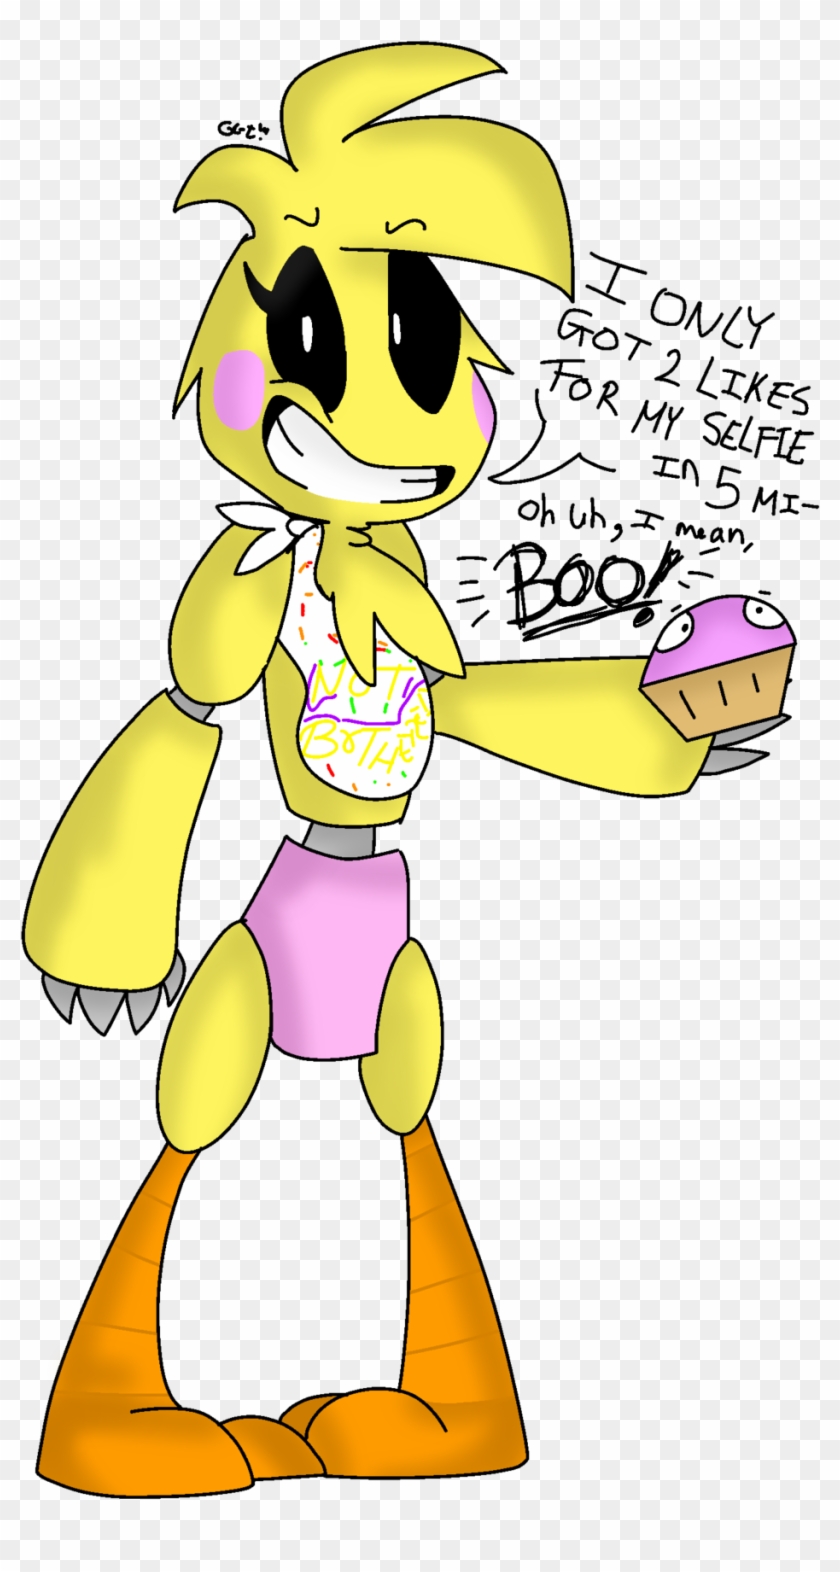 Toy Chica By Dizzee-toaster - Toy Chica And Chica Selfie #421031